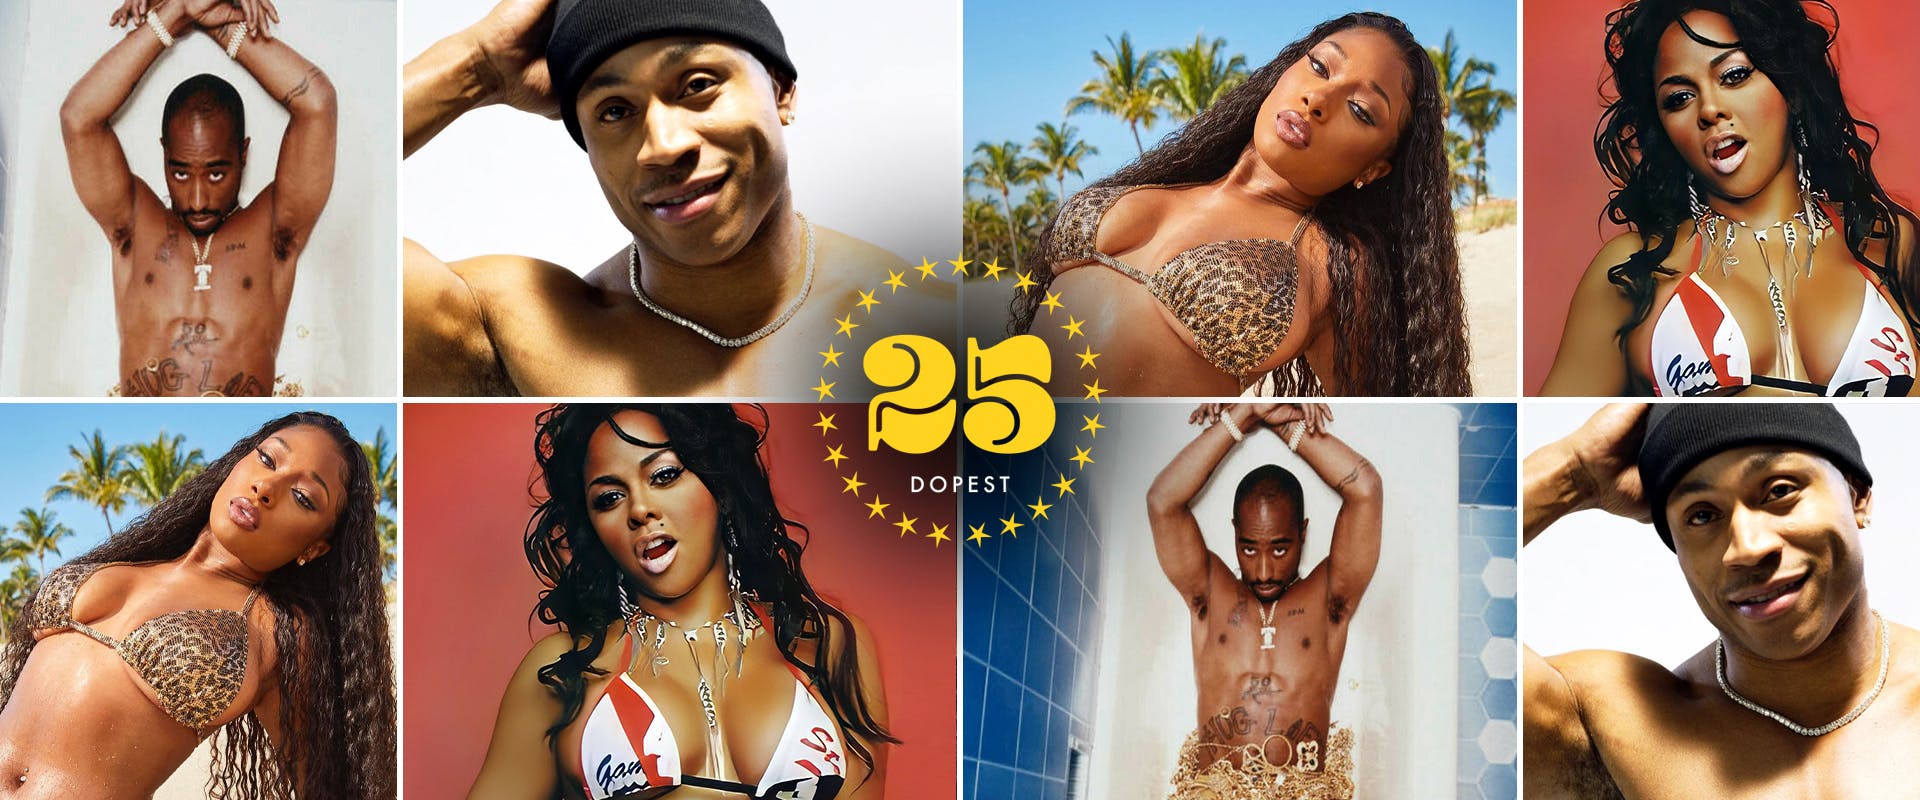 Jo Guest Blow Job - How Many Licks: The 25 Dopest Rap Songs to F*** To